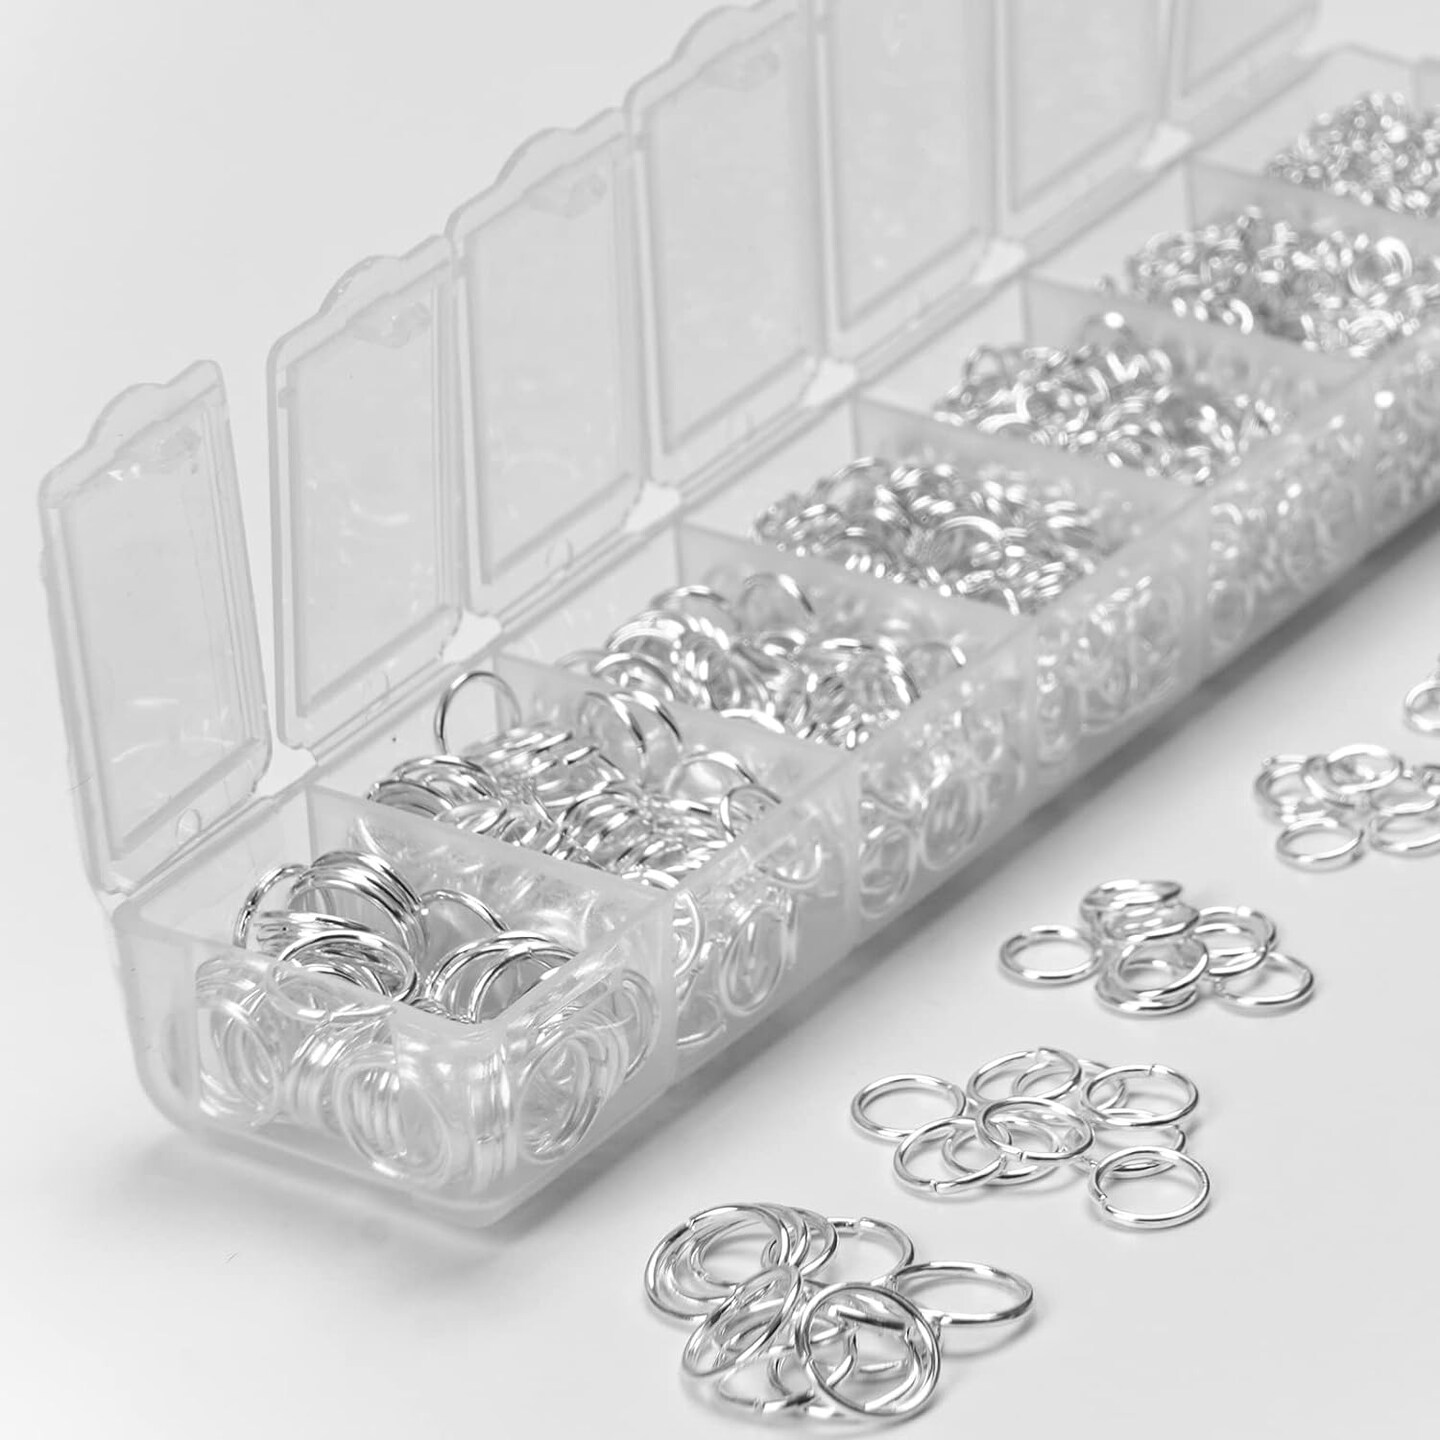 2300pc Assorted Silver Jump Rings for Crafts Jewelry Making Supplies - 7 Sizes (3mm to 10mm) DIY Open Jump Ring Hoops for Chain, Necklaces Links, Bracelets, Earrings, Keychain, Split ring for Crafting